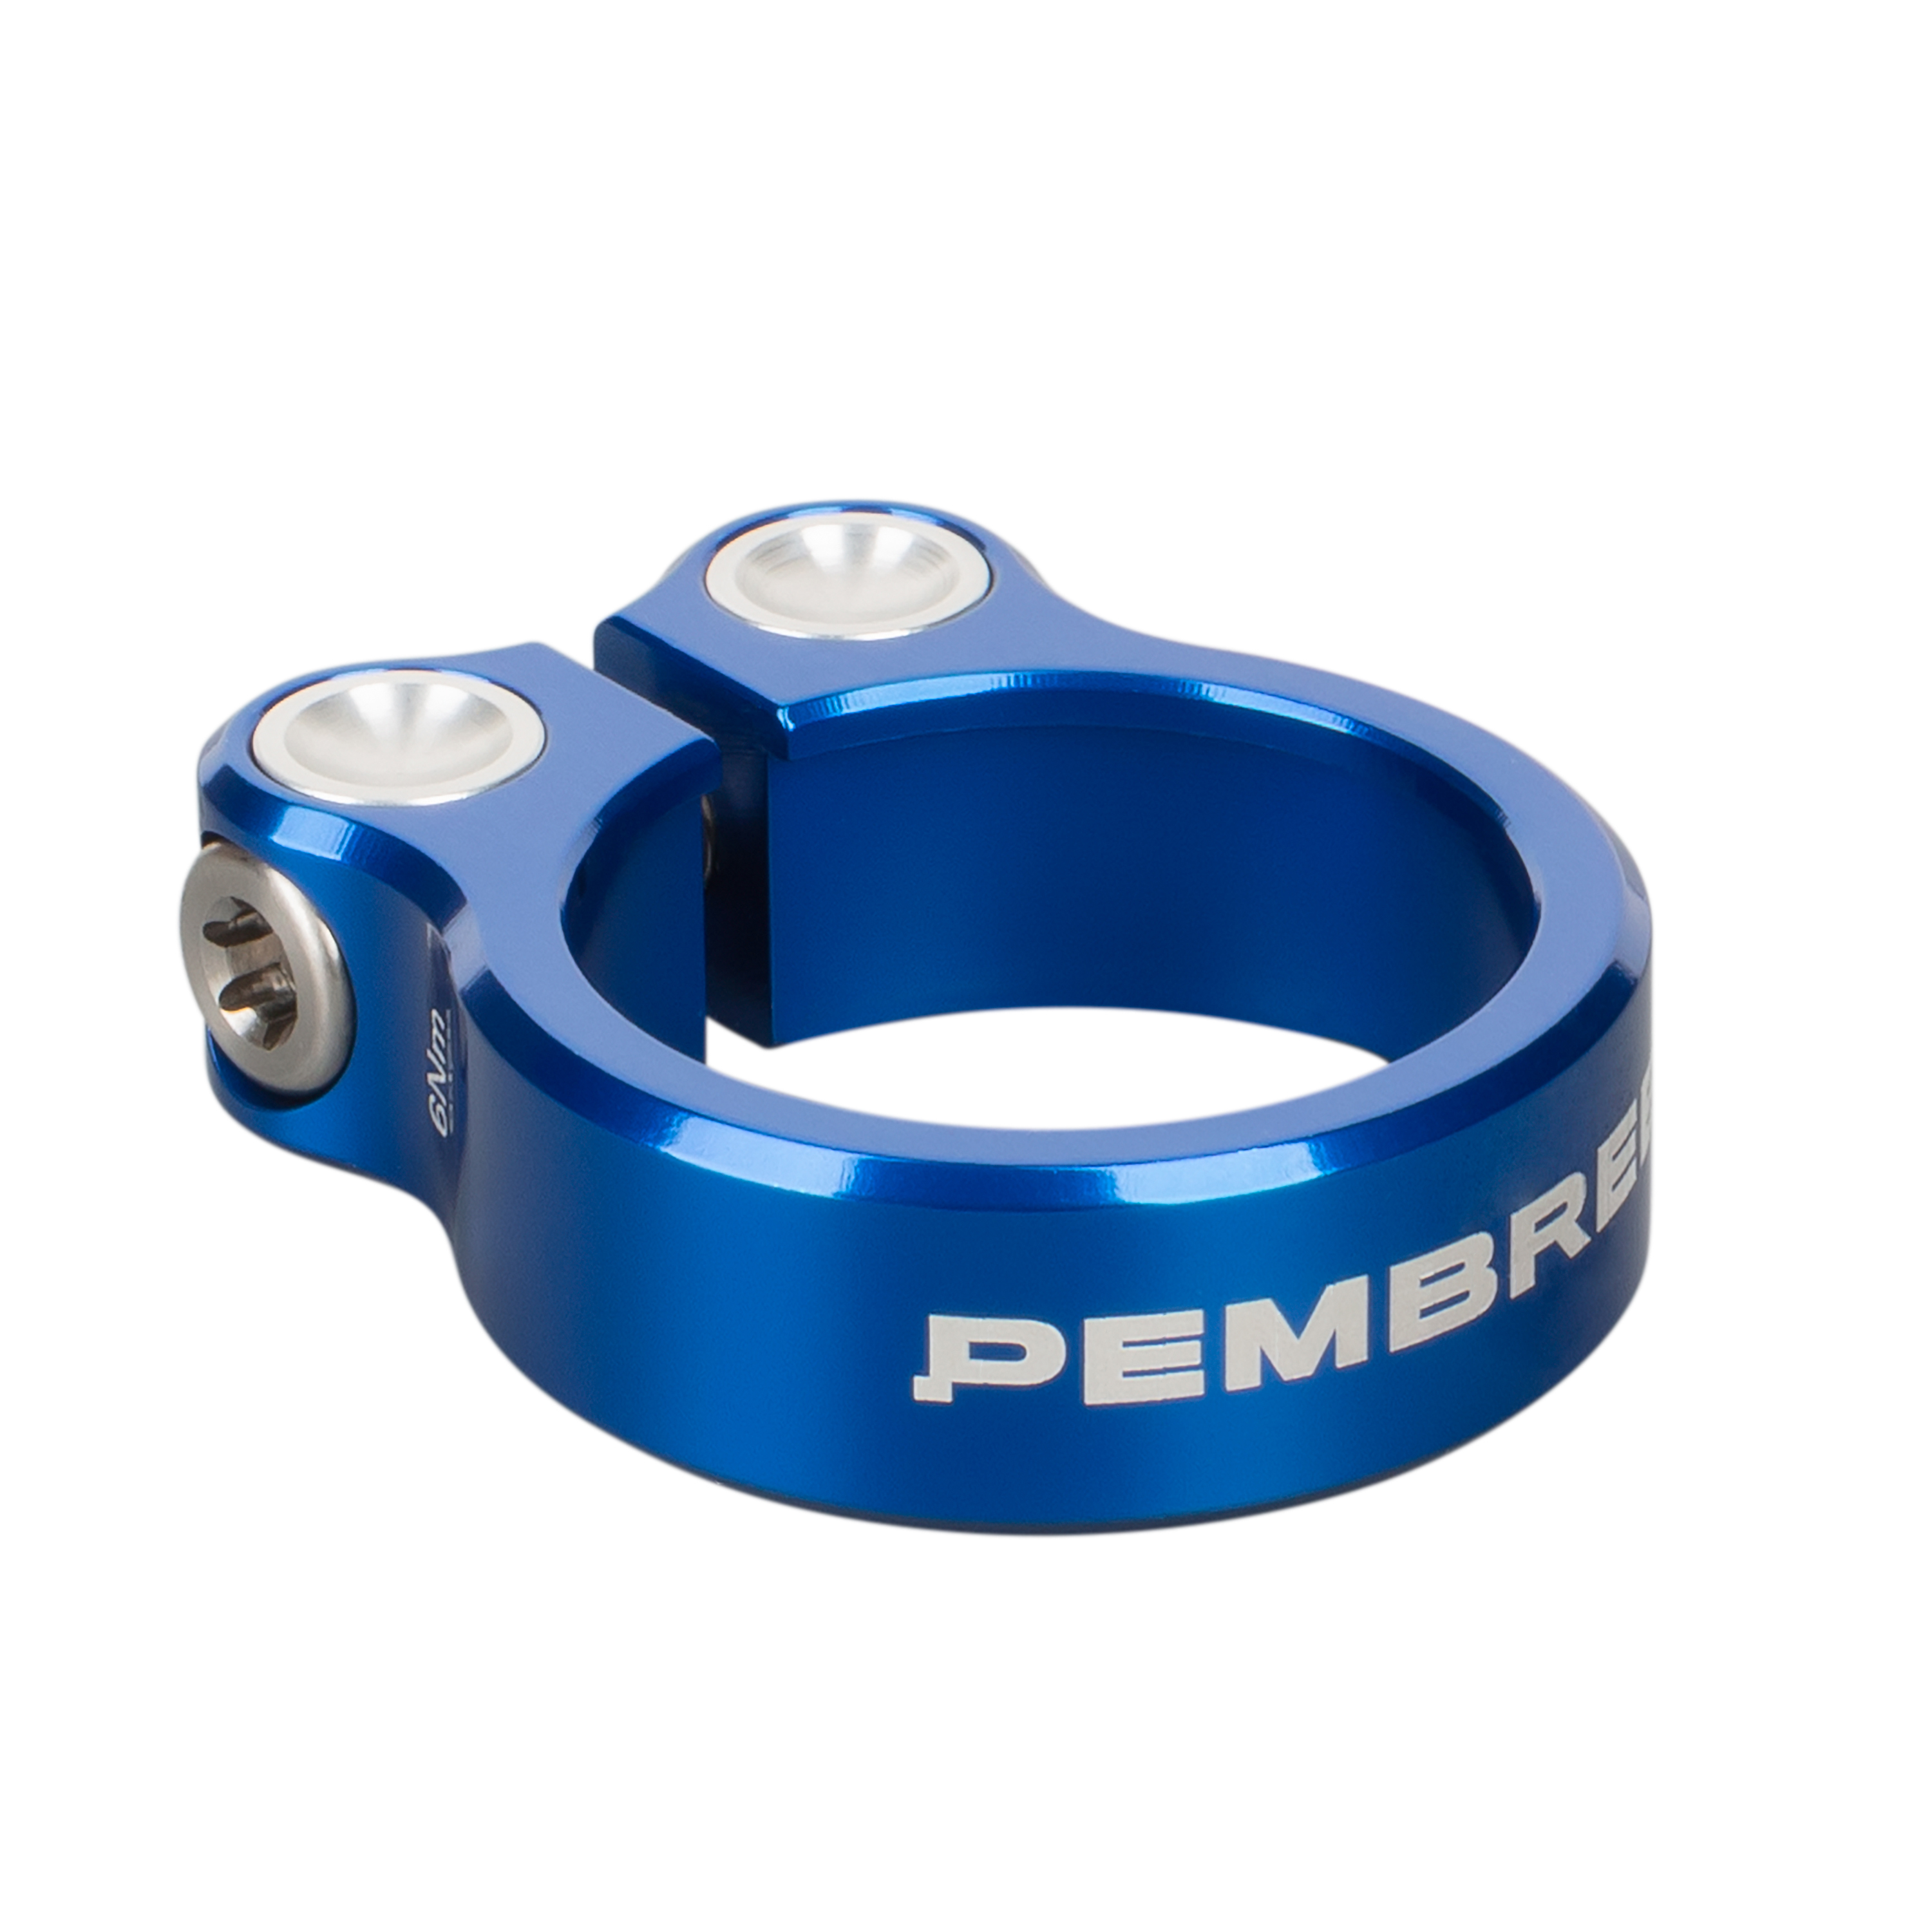 PEMBREE-DBN-Seat-Post-Clamp-Blue-Angle.jpg